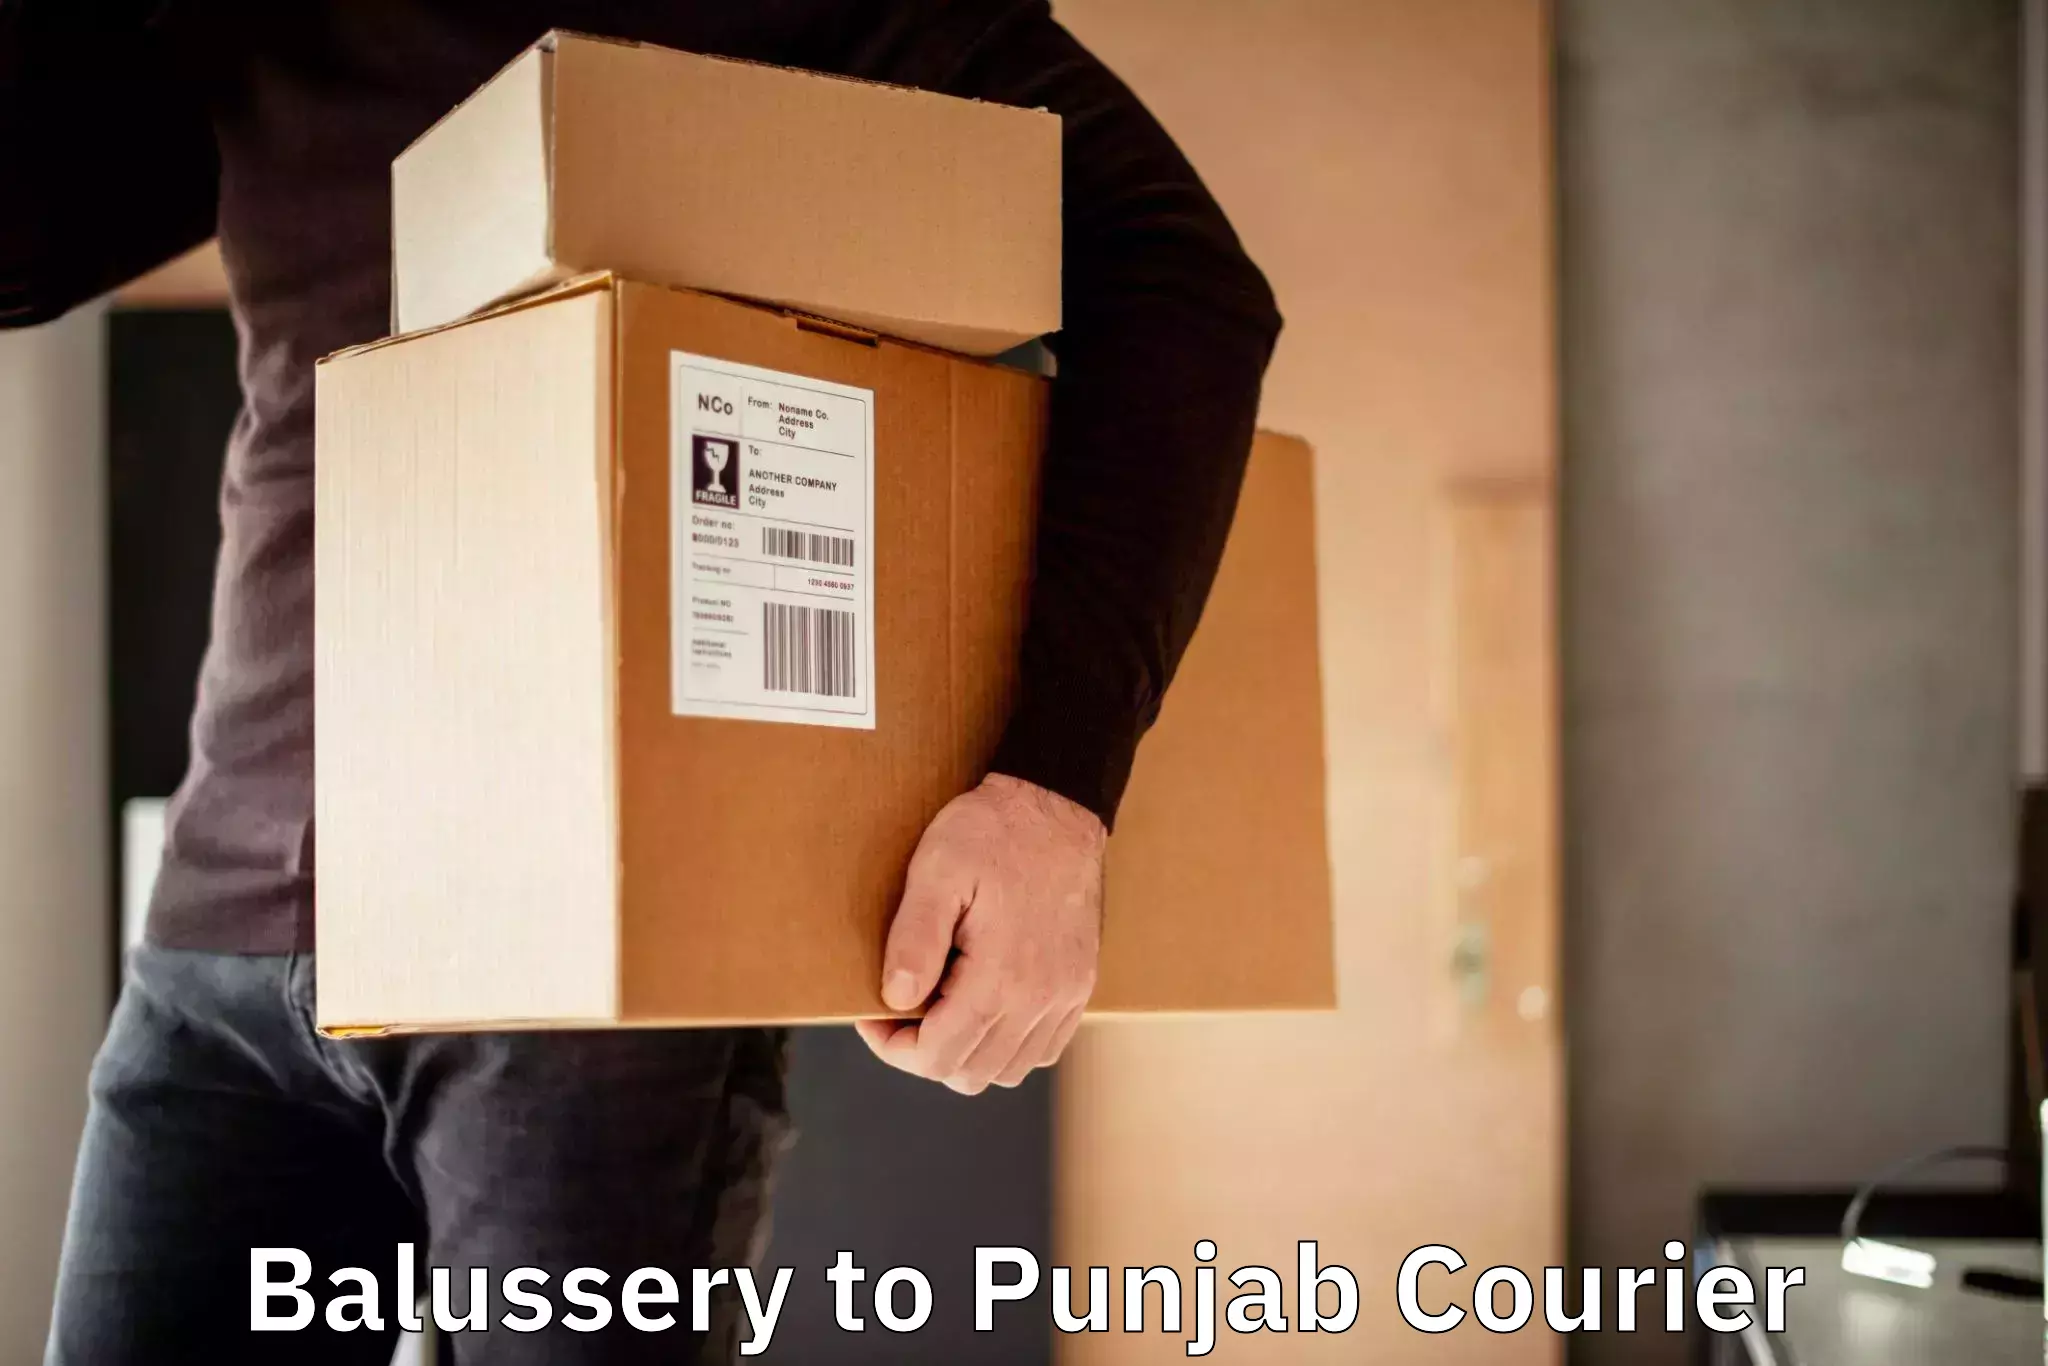 Reliable delivery network Balussery to Punjab